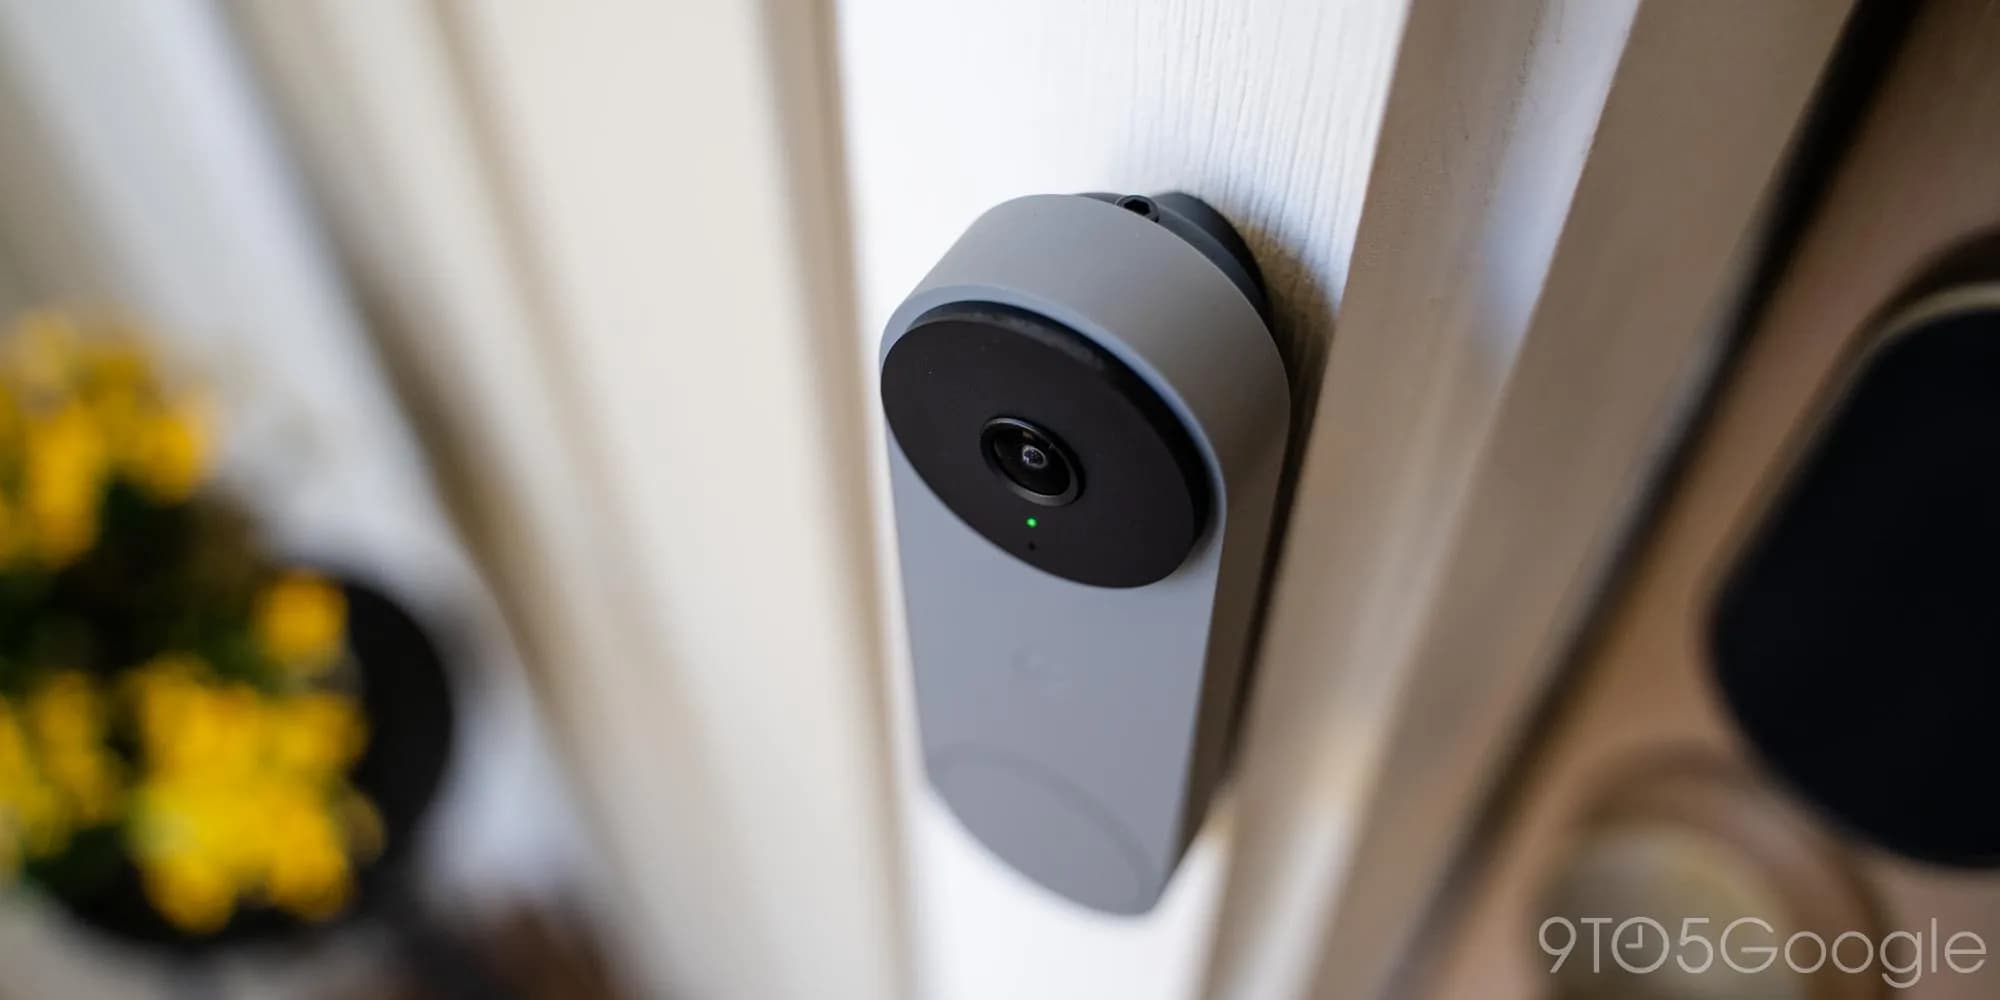 Should You Add a Nest Cam to Your Homekit Smart Home? - AI Time Journal -  Artificial Intelligence, Automation, Work and Business